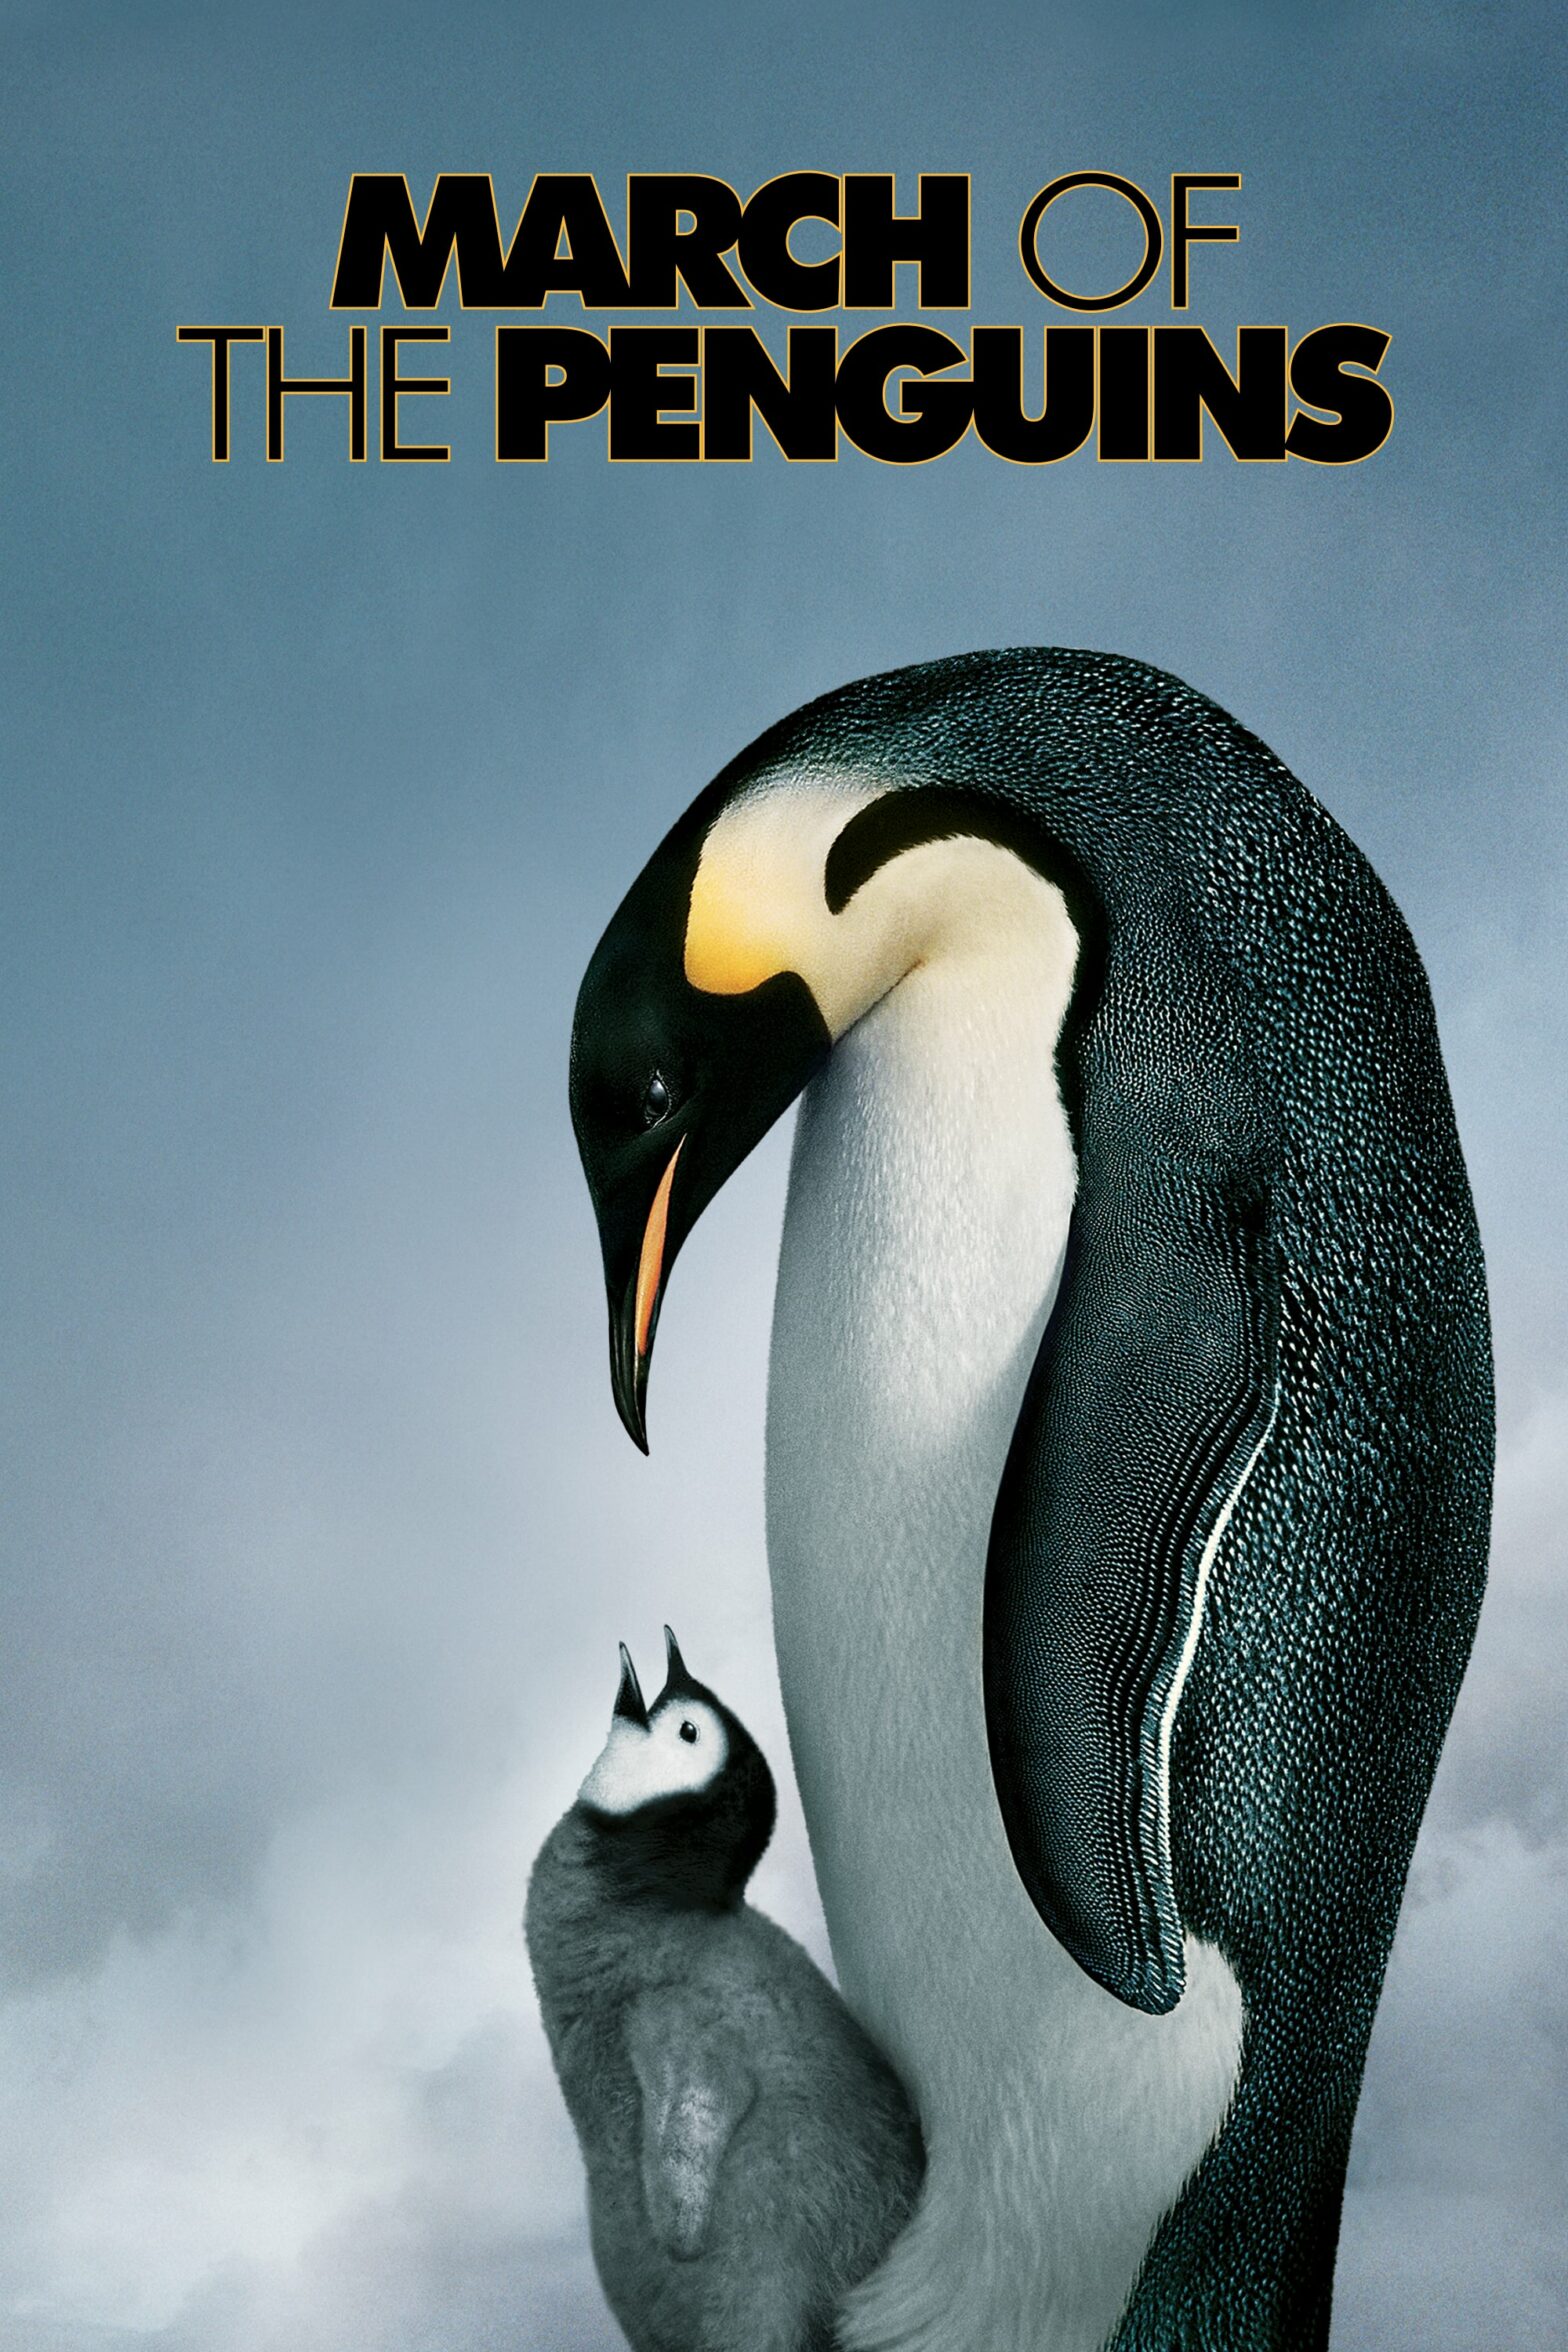 Poster for the movie "March of the Penguins"